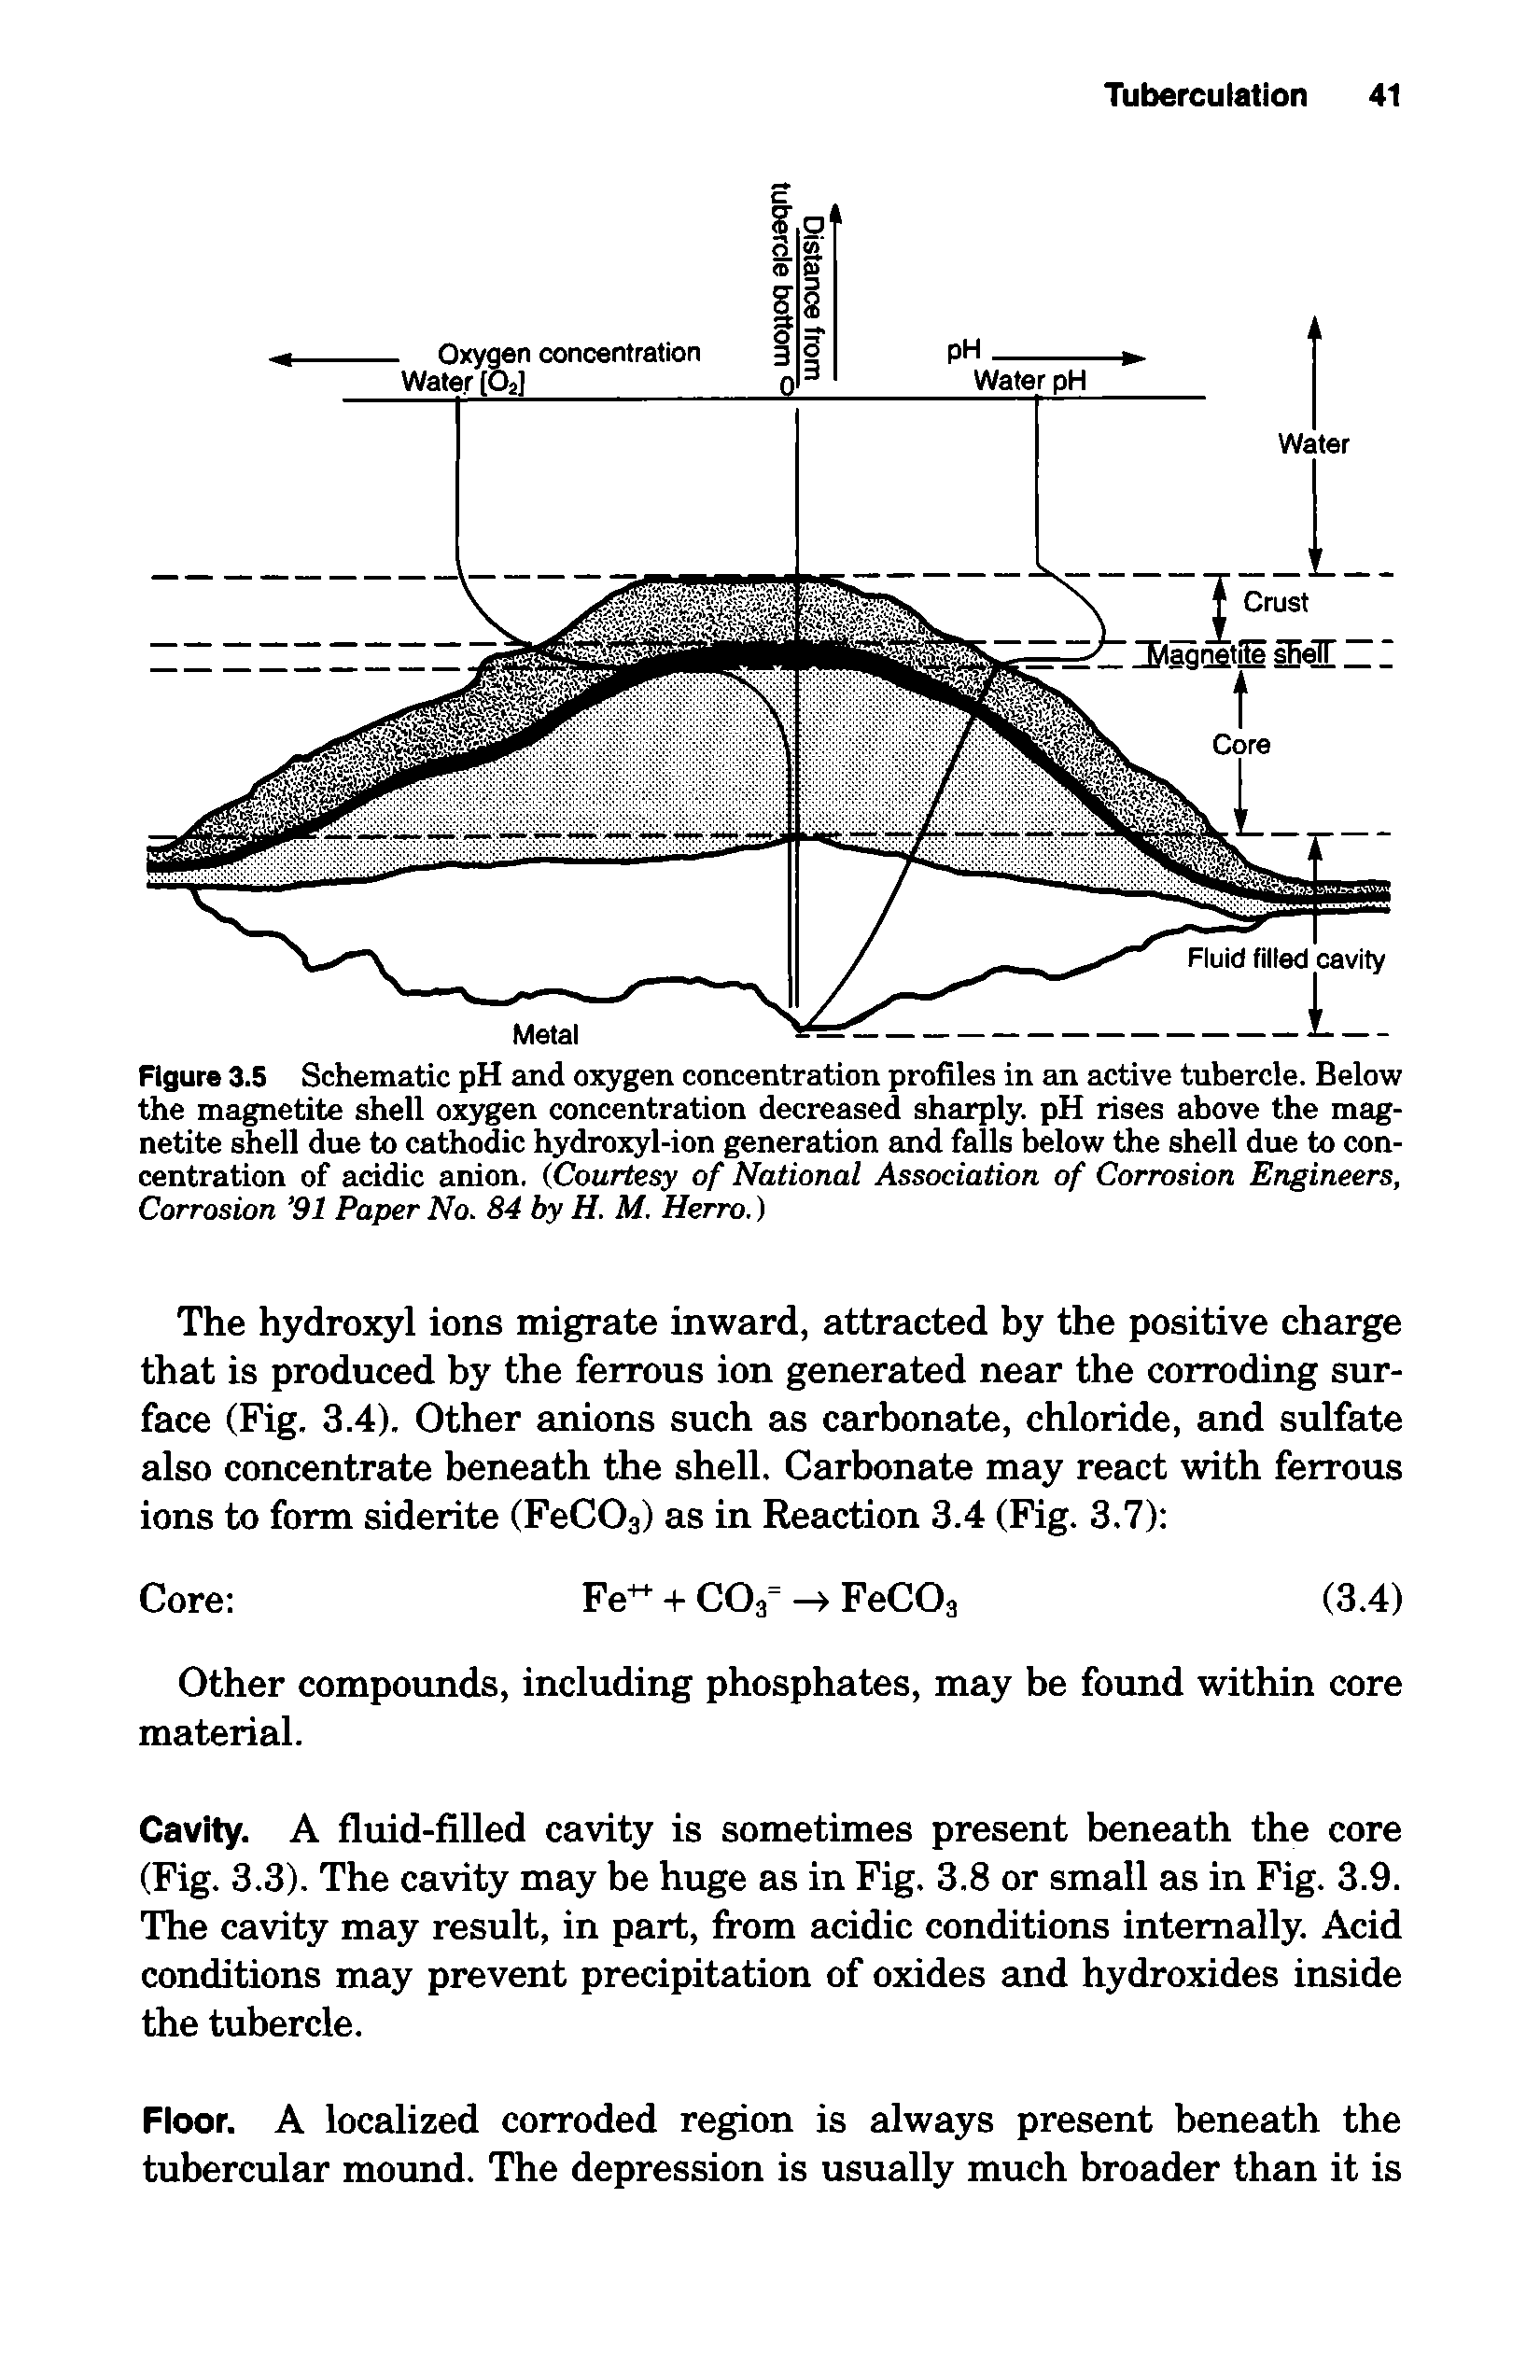 Figure 3.5 Schematic pH eind oxygen concentration profiles in an active tubercle. Below the magnetite shell oxygen concentration decreased sharply. pH rises above the magnetite shell due to cathodic hydroxyl-ion generation emd falls below the shell due to concentration of acidic anion, (Courtesy of National Association of Corrosion Engineers, Corrosion 91 Paper No. 84 by H. M. Herro.)...